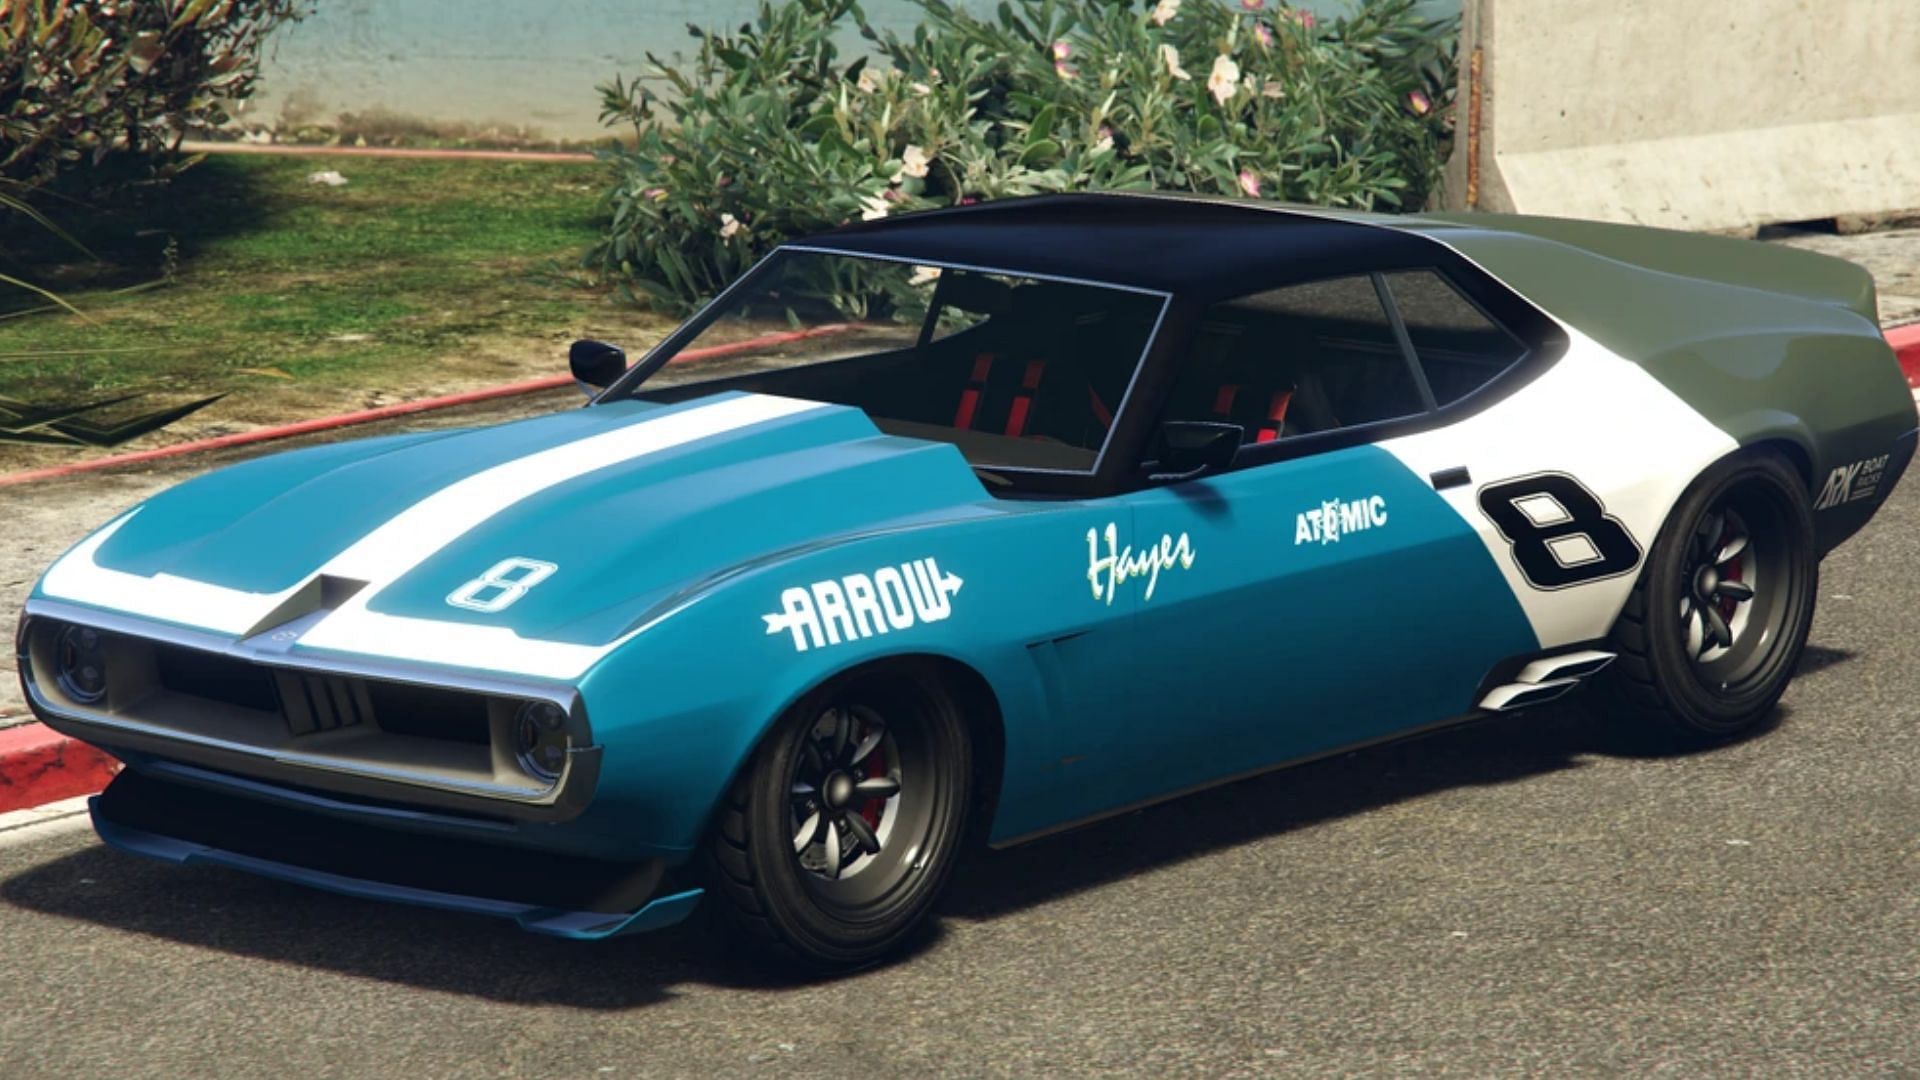 The Schyster Deviant with a custom livery in Grand Theft Auto 5 Online (Image via Rockstar Games, GTA Wiki)